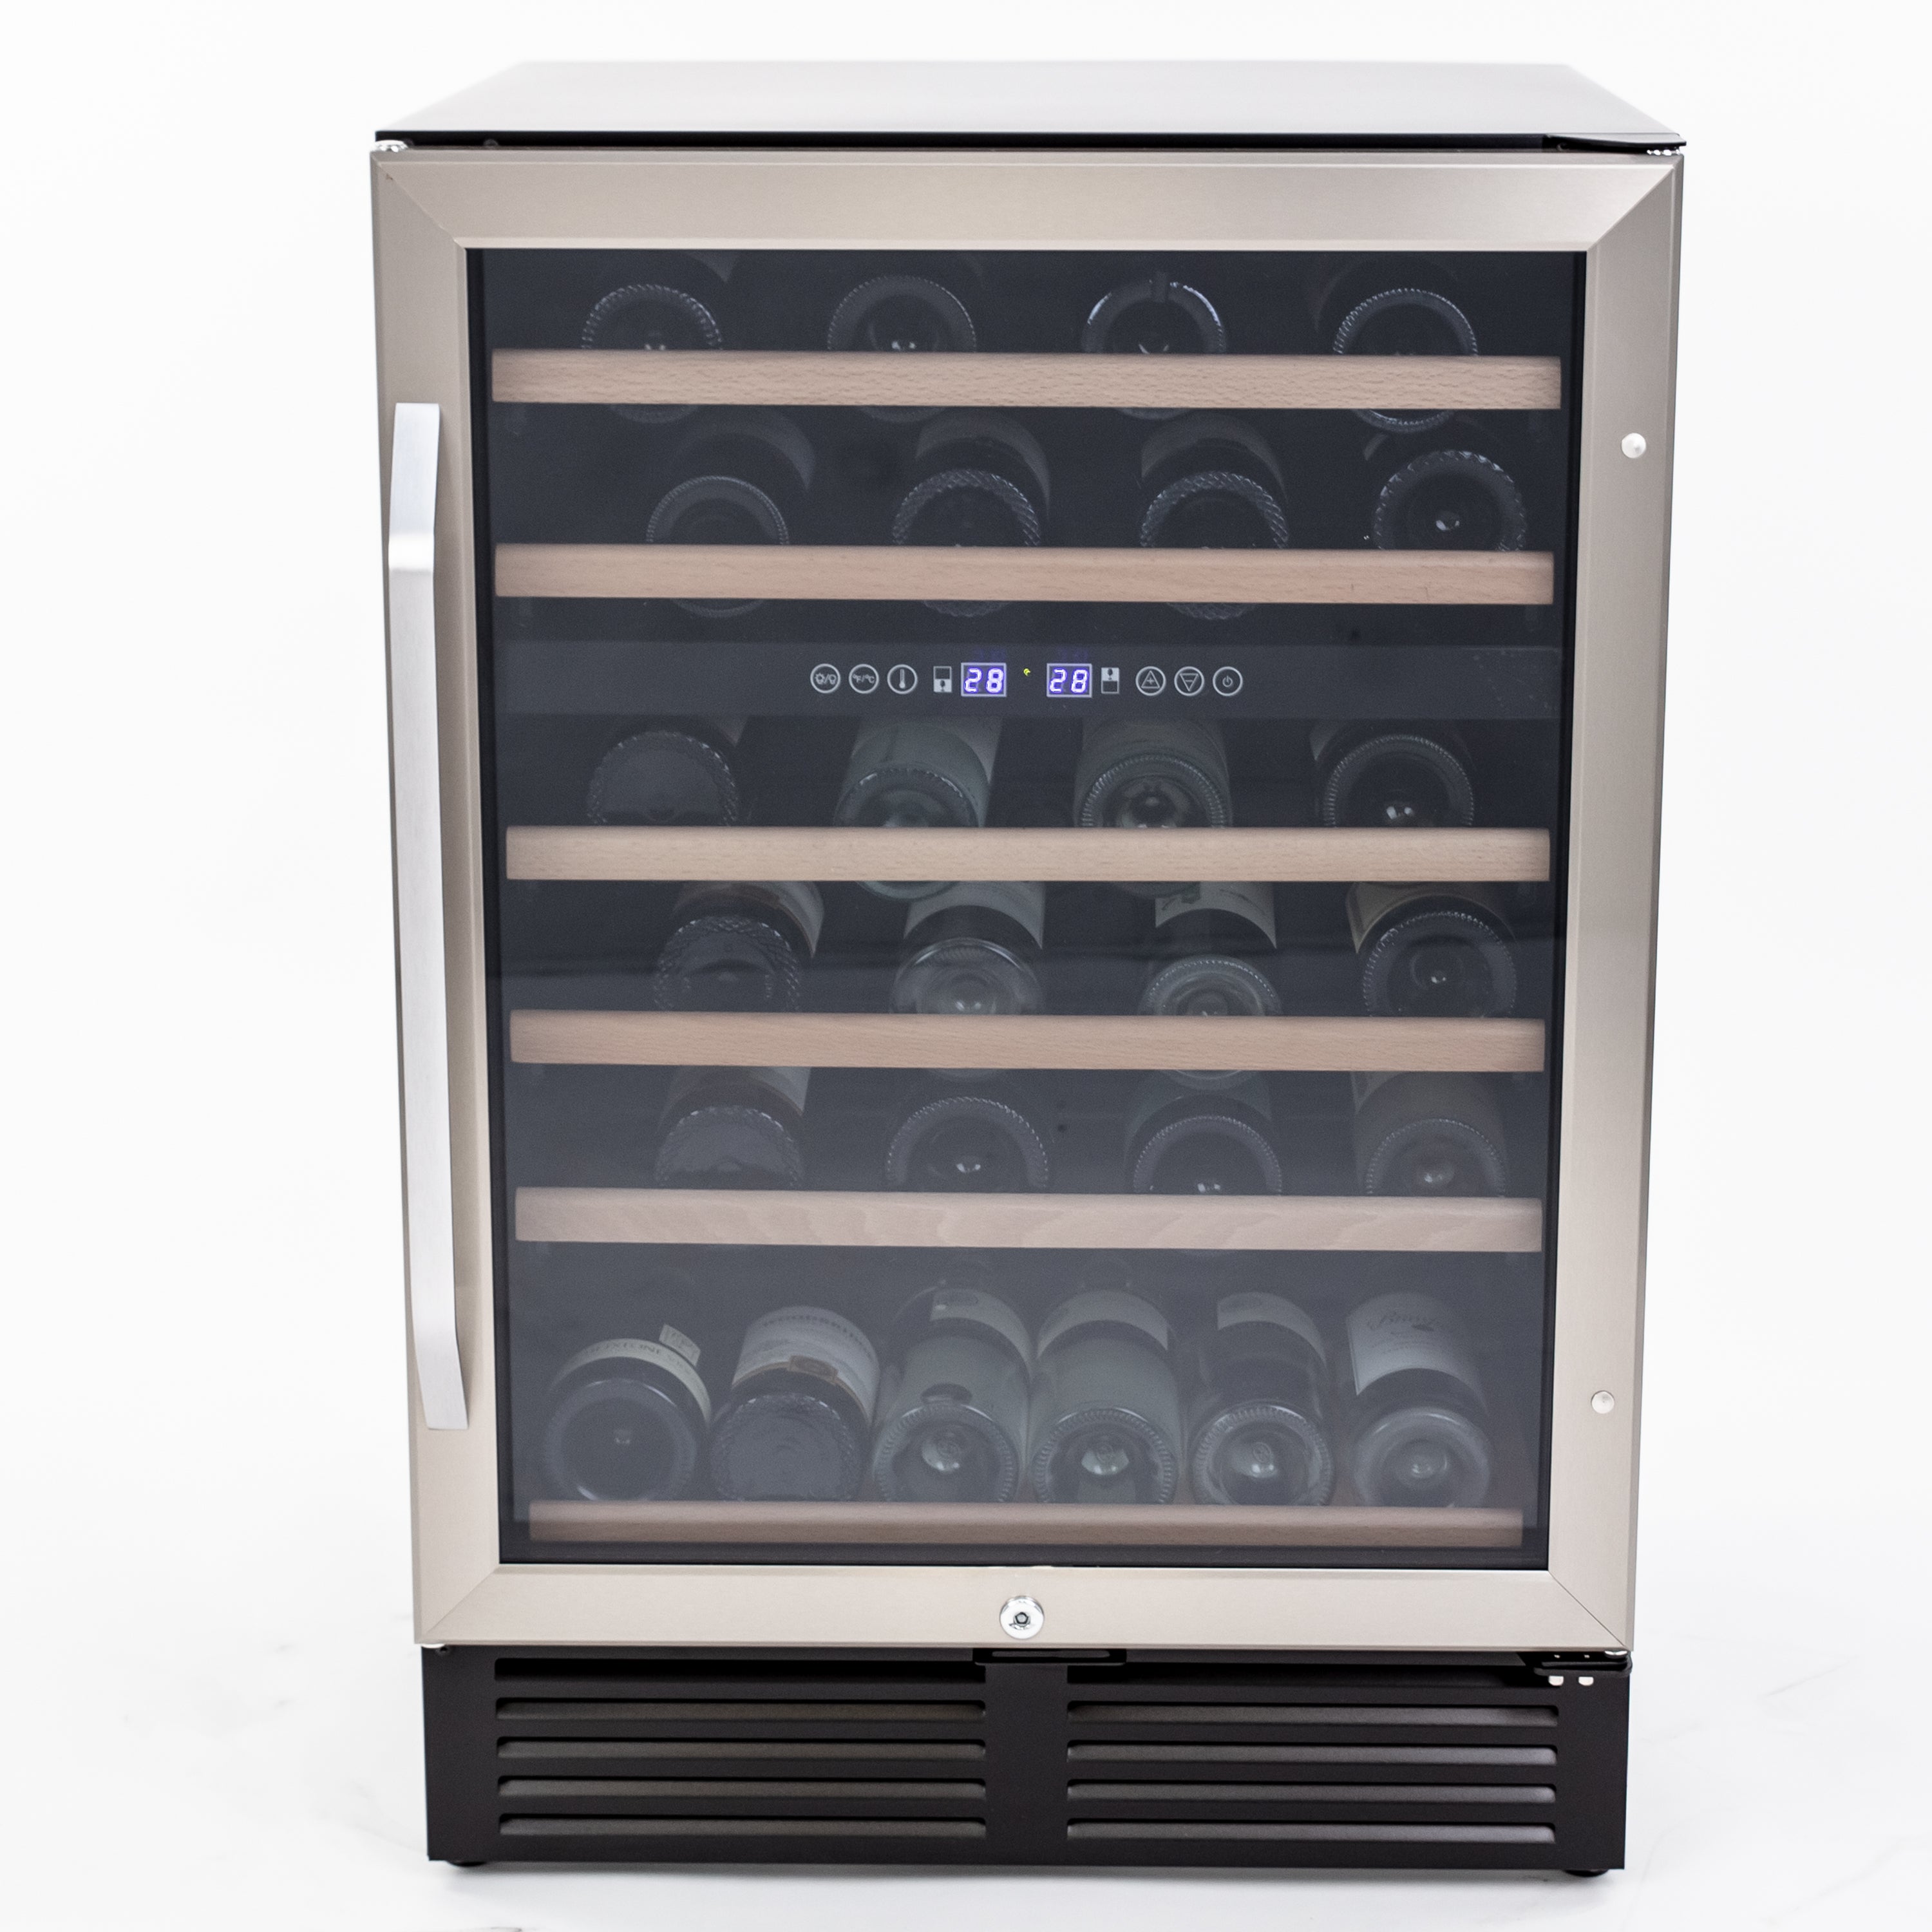 Avanti - WCR496DS, Dual-Zone Wine Cooler, 49 Bottle Capacity, in Stainless Steel with Wood Accent Shelving